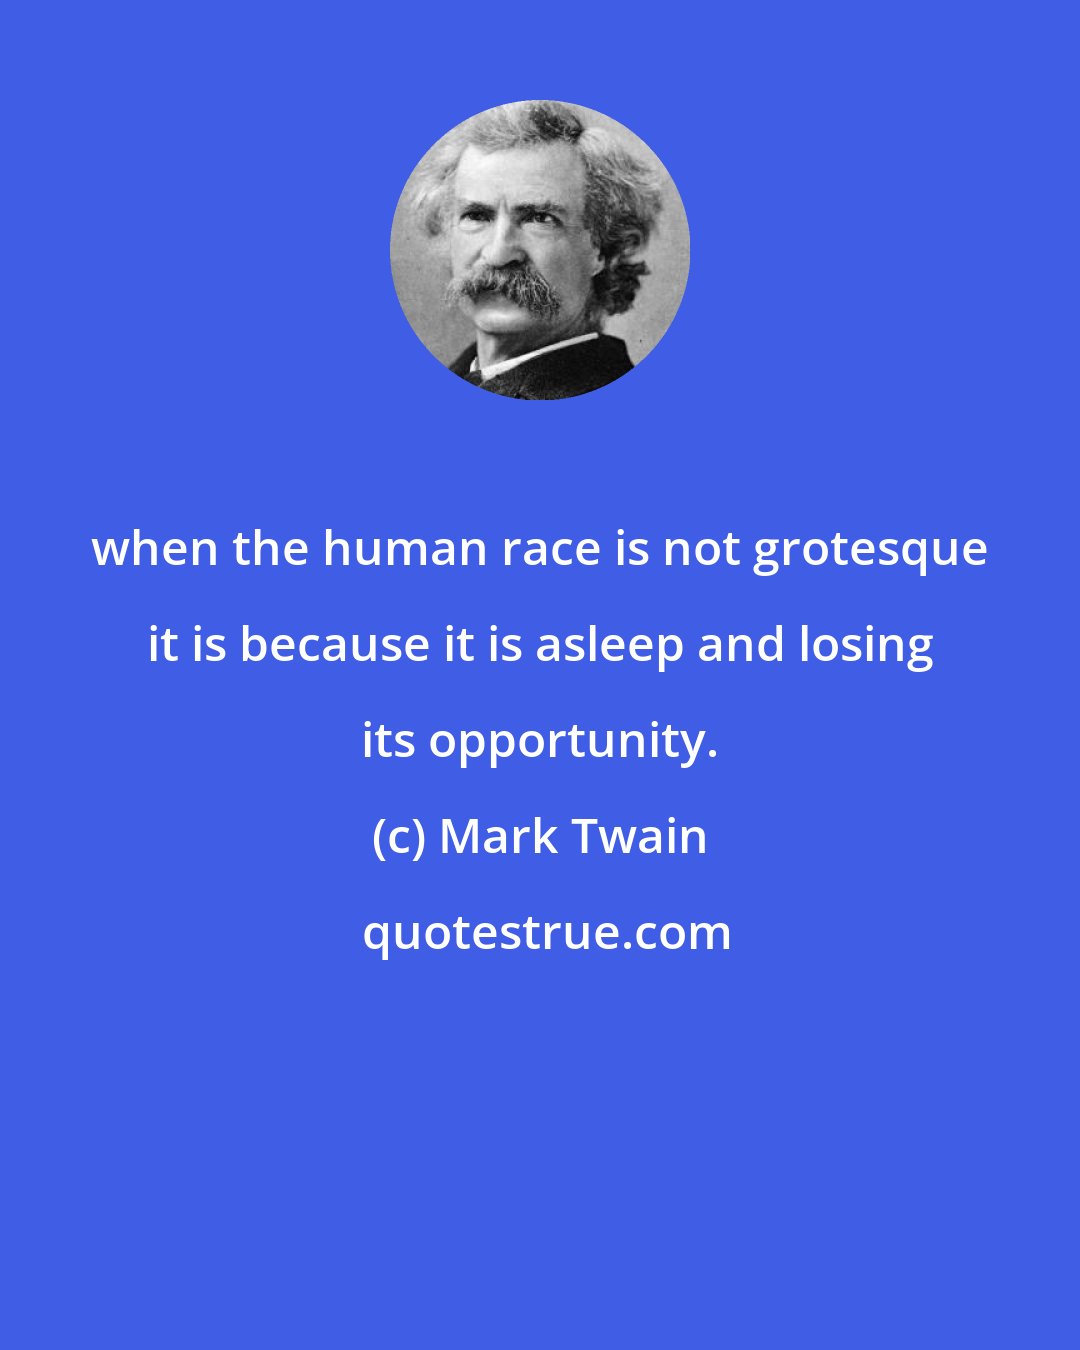 Mark Twain: when the human race is not grotesque it is because it is asleep and losing its opportunity.